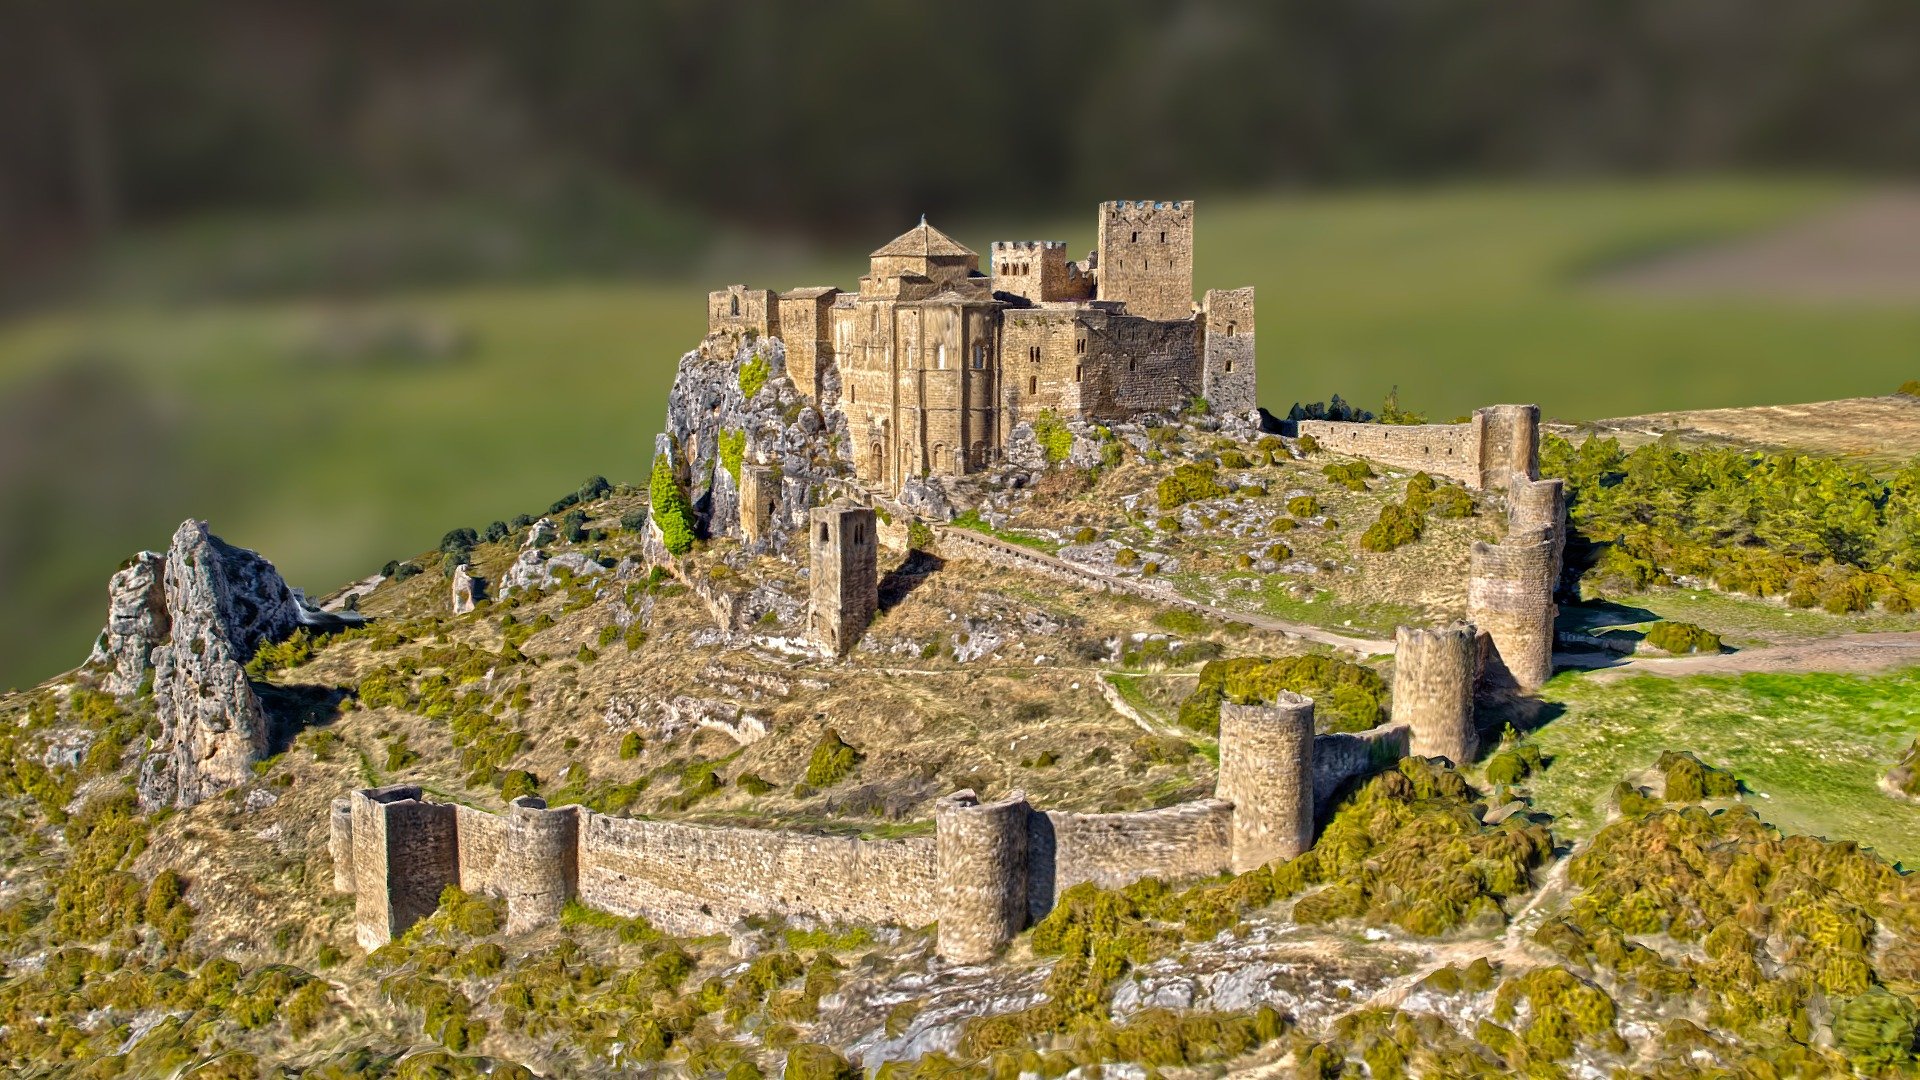 The Castle of Loarre is a Romanesque Castle and Abbey located near the town of the same name, Huesca Province in the Aragon autonomous region of Spain. It is one of the oldest castles in Spain.
Wikipedia

coordinates: 42.325534, -0.612389

photogrammetry from video - Loarre Castle  -RAWscan - Download Free 3D model by Andrea Spognetta (Spogna) (@spogna) 3d model